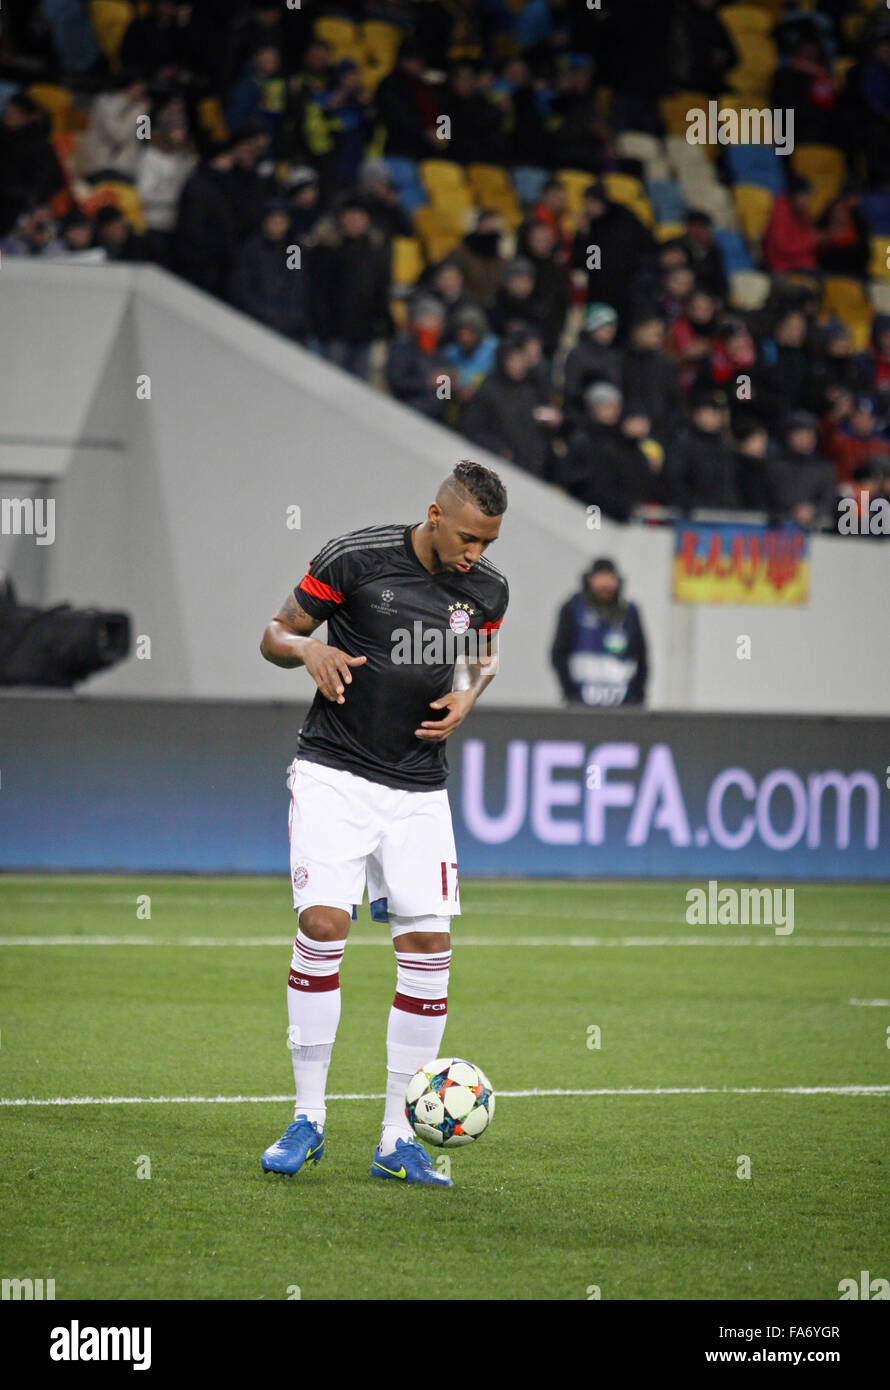 LVIV, UKRAINE - FEBRUARY 17, 2015: Jerome Boateng of Bayern Munich controls a ball during warm up session before UEFA Champions League game against FC Shakhtar Donetsk Stock Photo